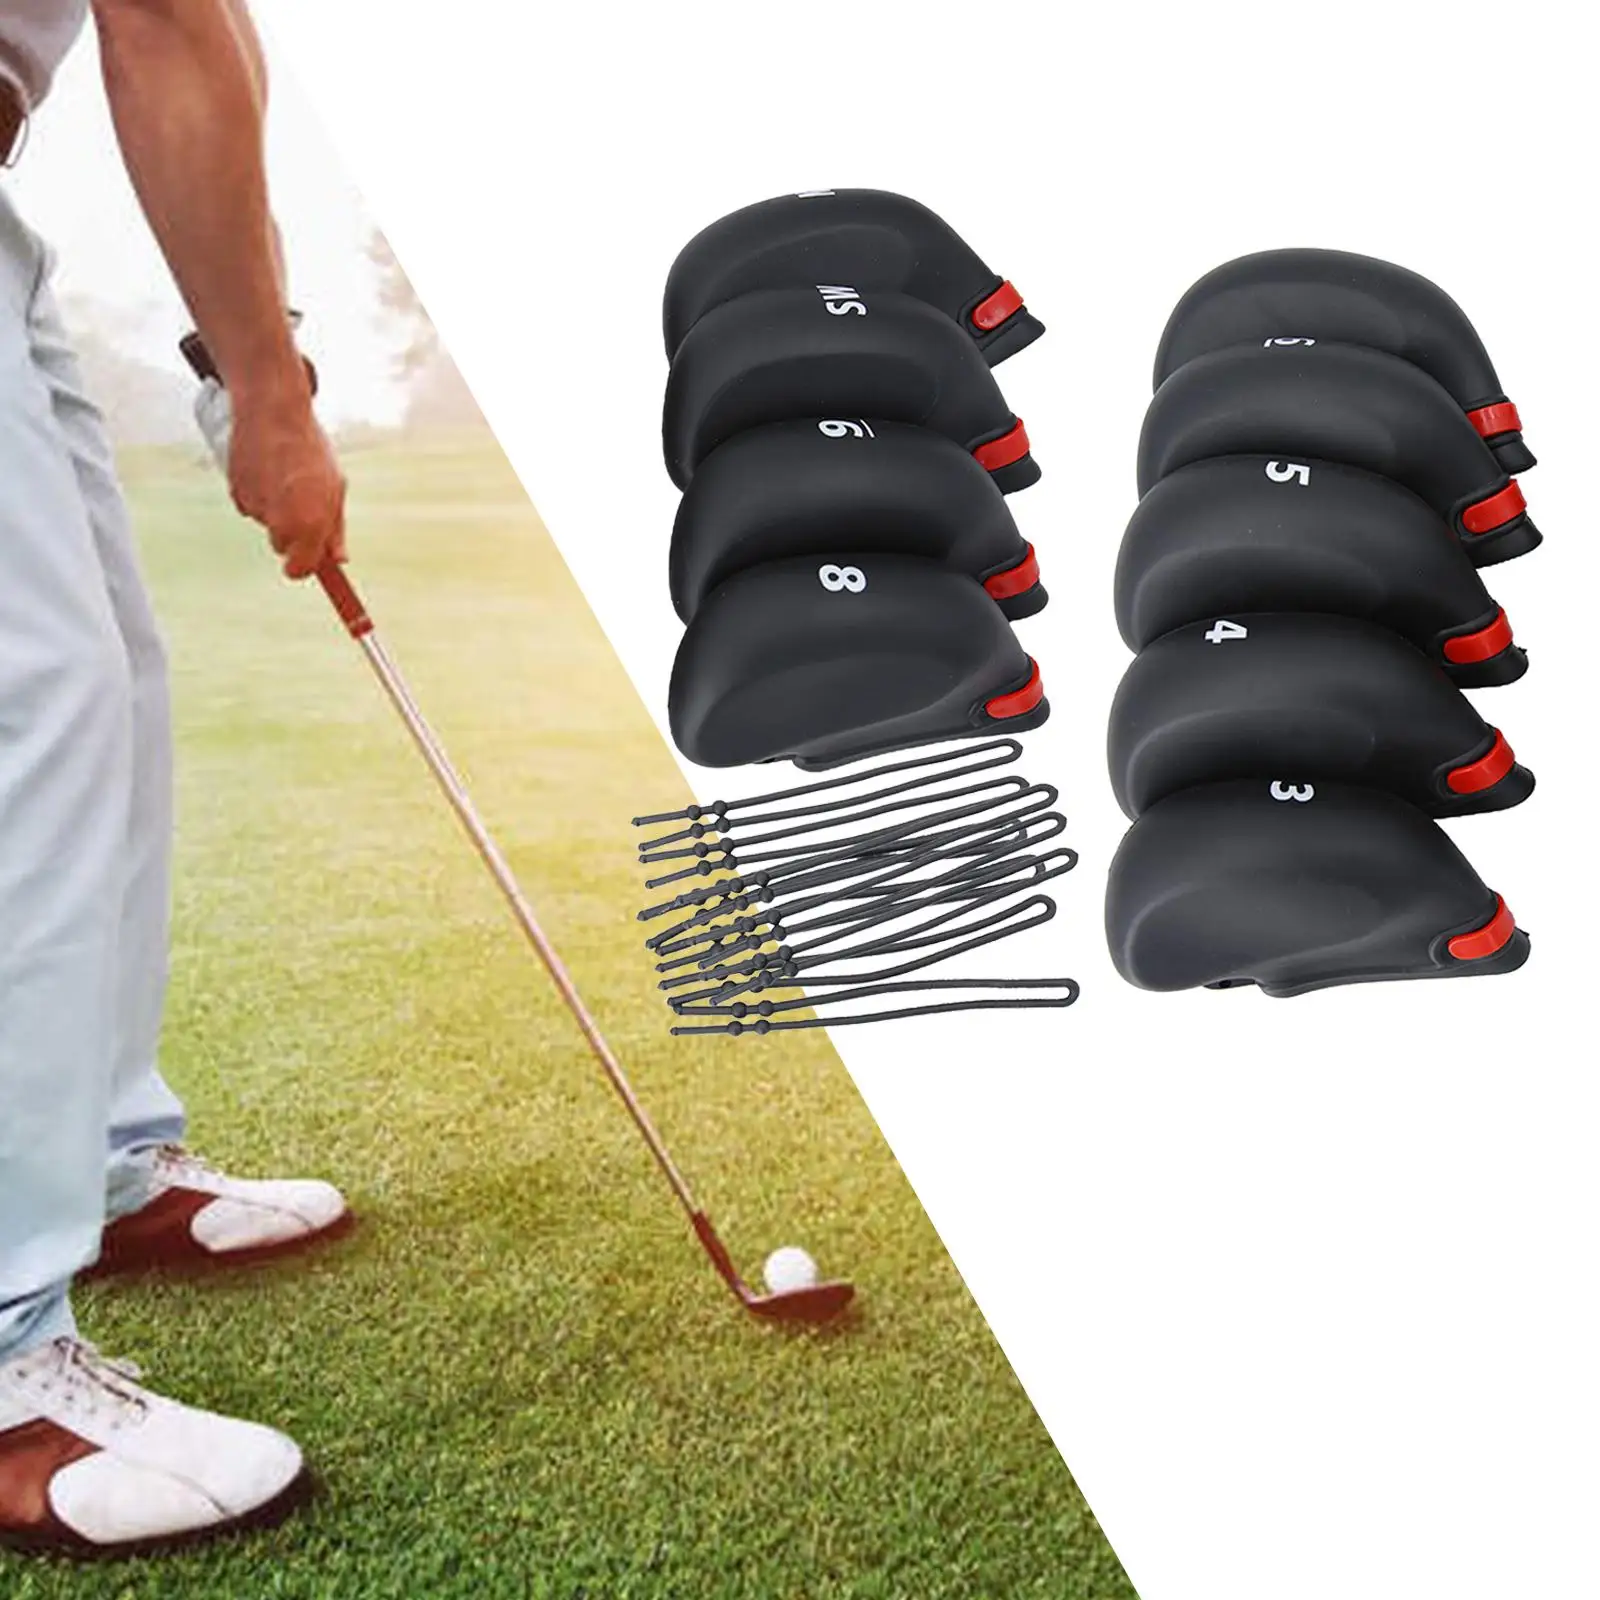 Golf Club Iron Covers , Deluxe Head Cover Set, covers for head for Irons Fit Main Iron Clubs